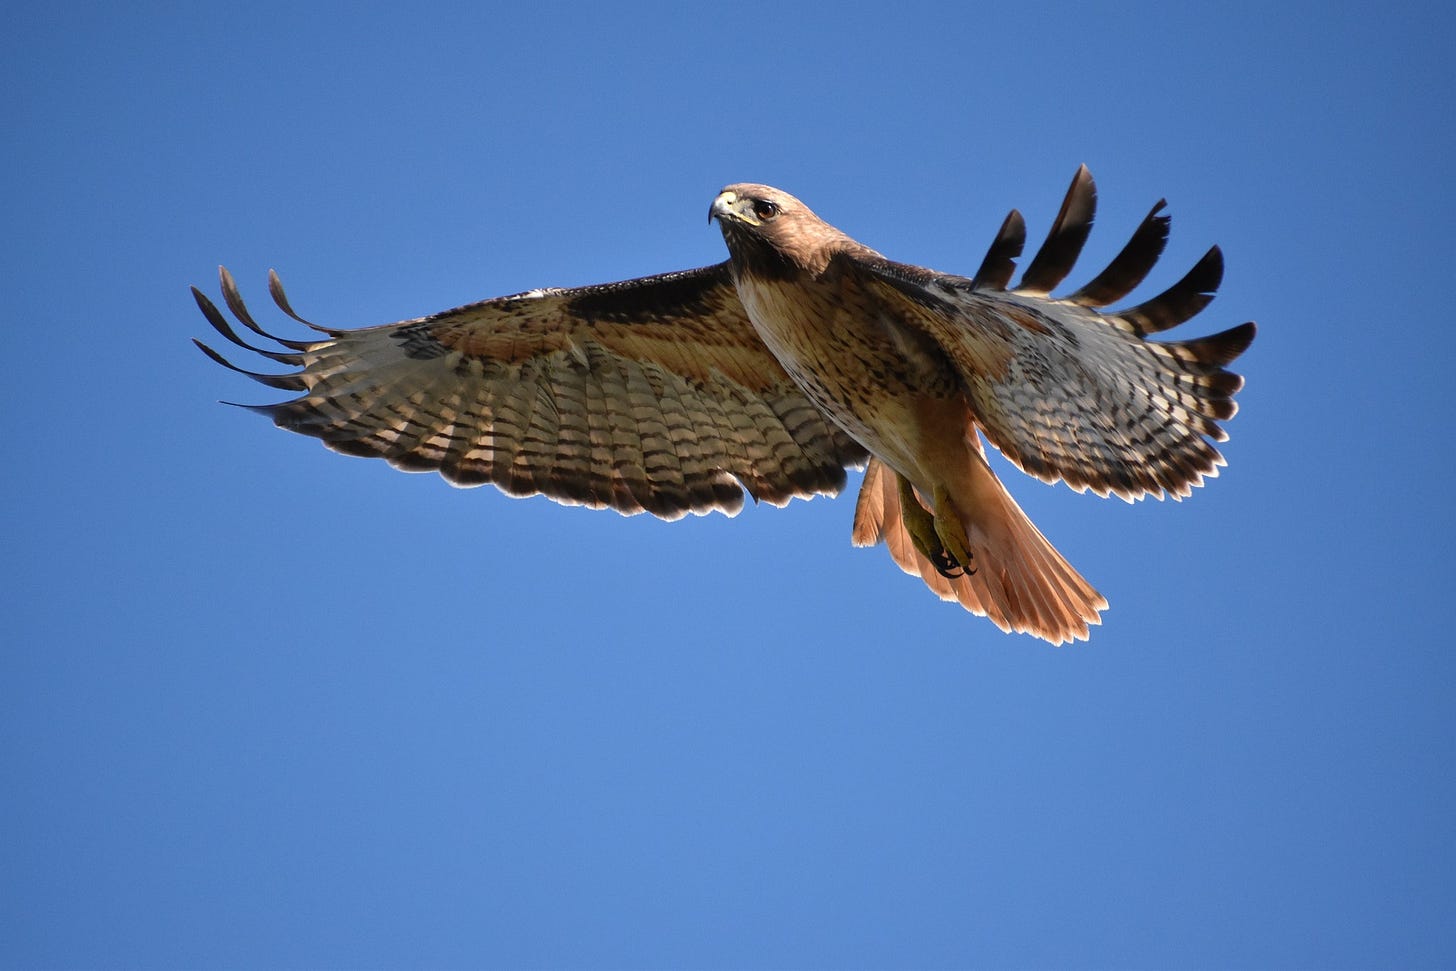 Blue sky background and photo of hawk in flight with wings outstretched.